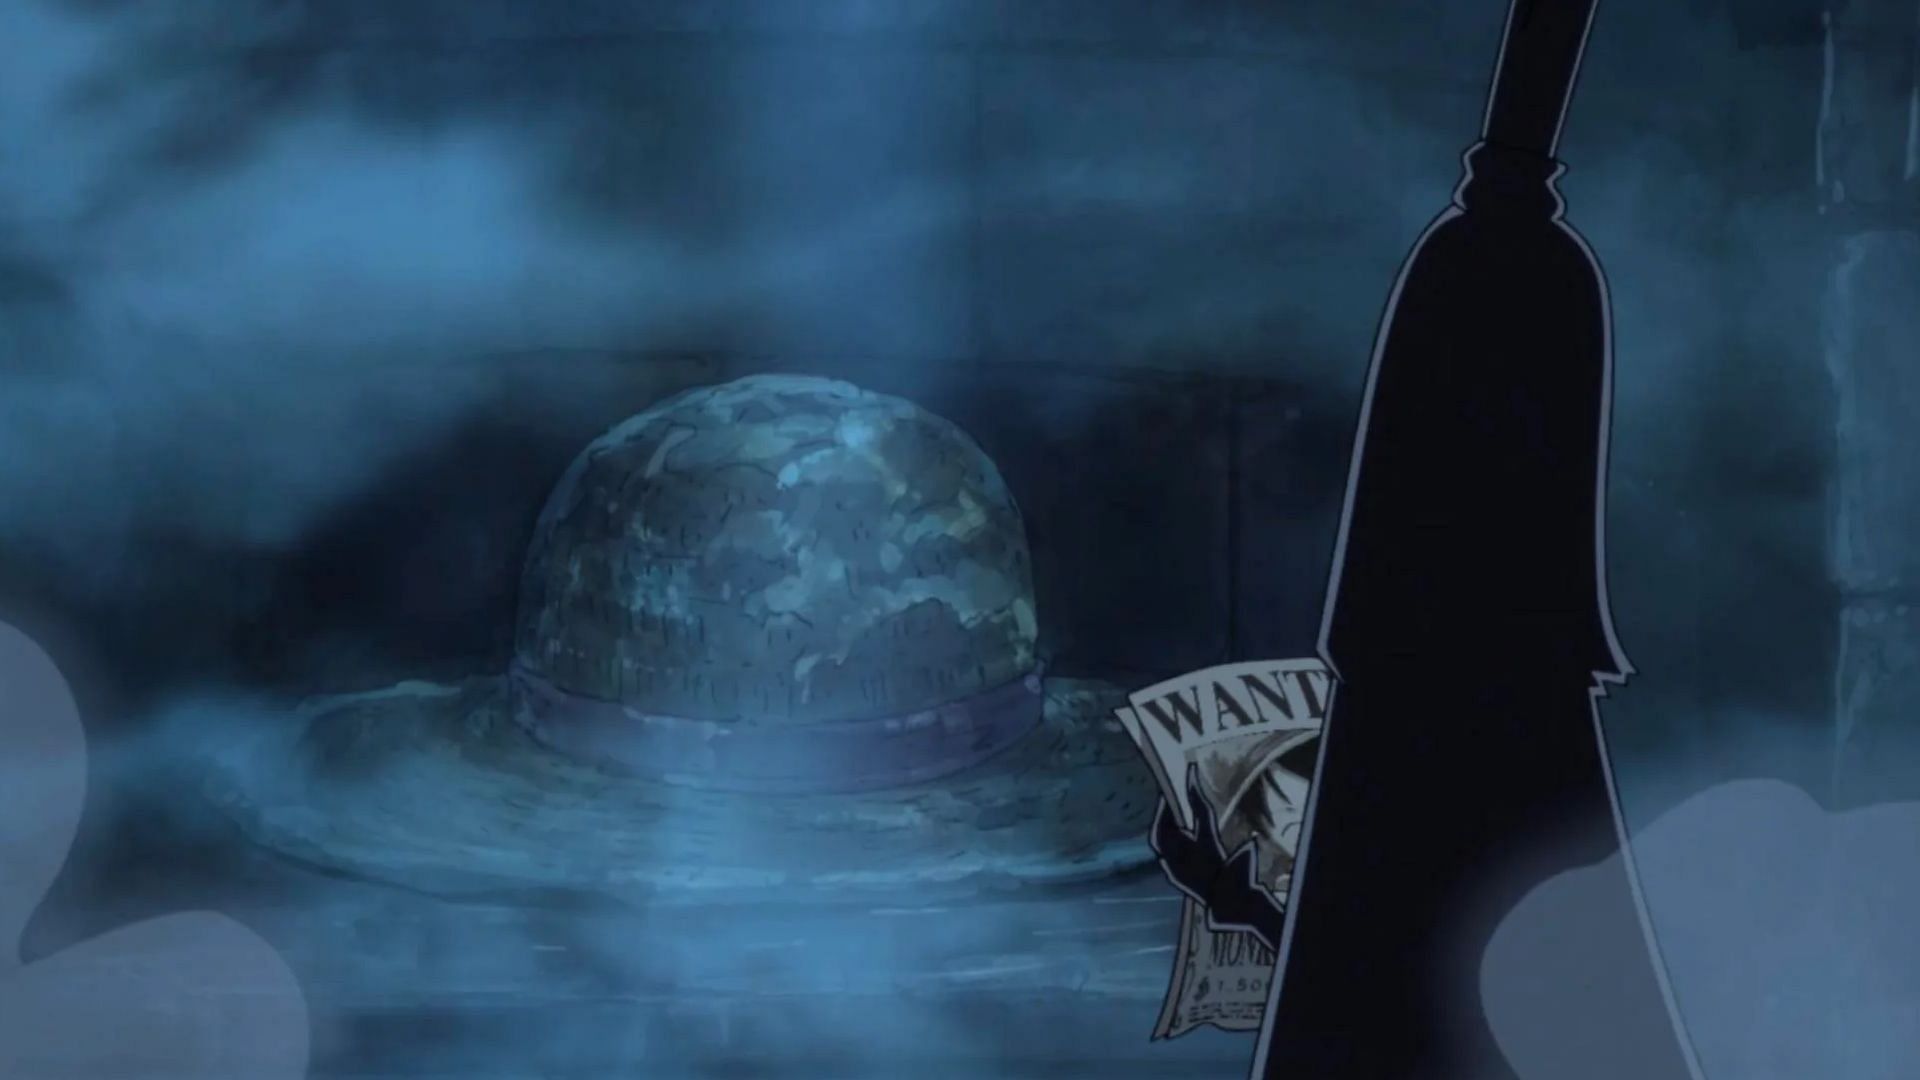 The giant straw hat as seen in the One Piece anime (Image via Toei Animation, One Piece)